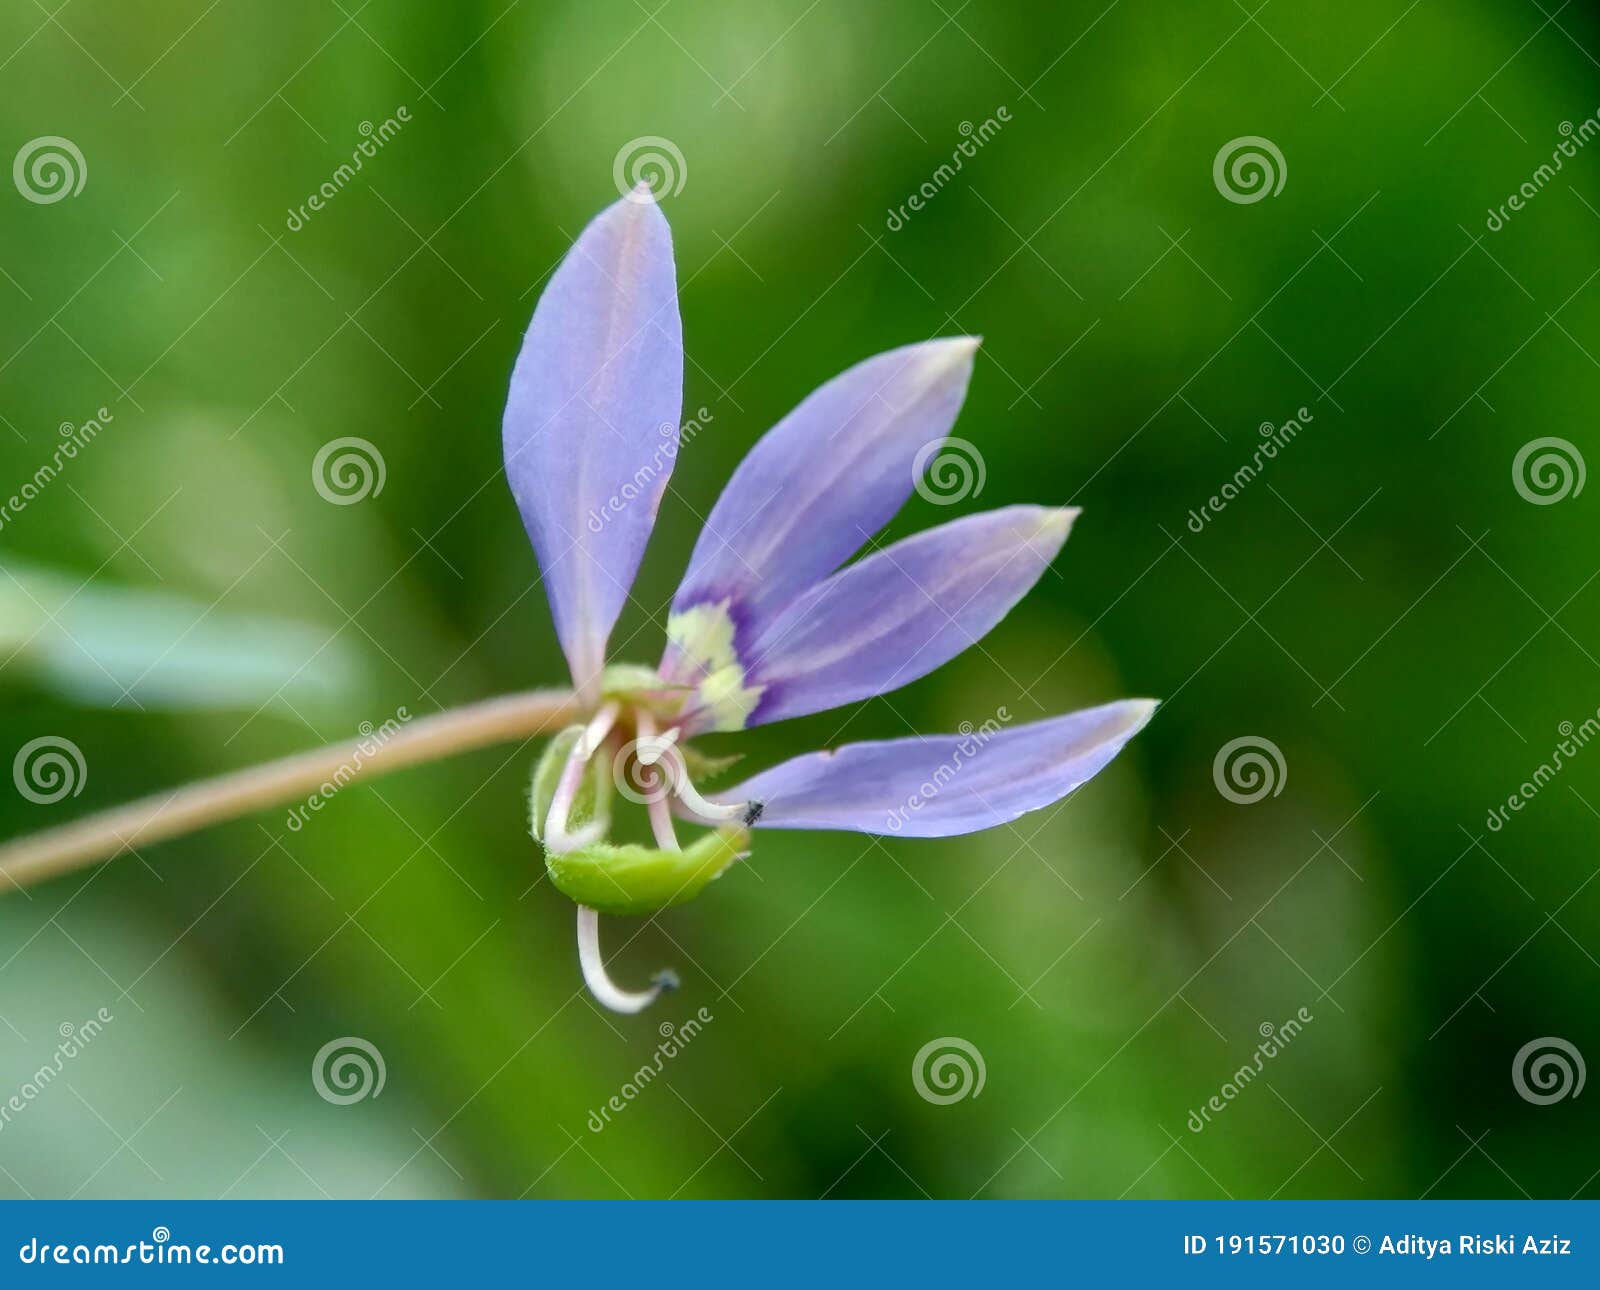 macro shot of cleome rutidosperma fringed spider flower, purple cleome, maman ungu, maman lanang with a natural background